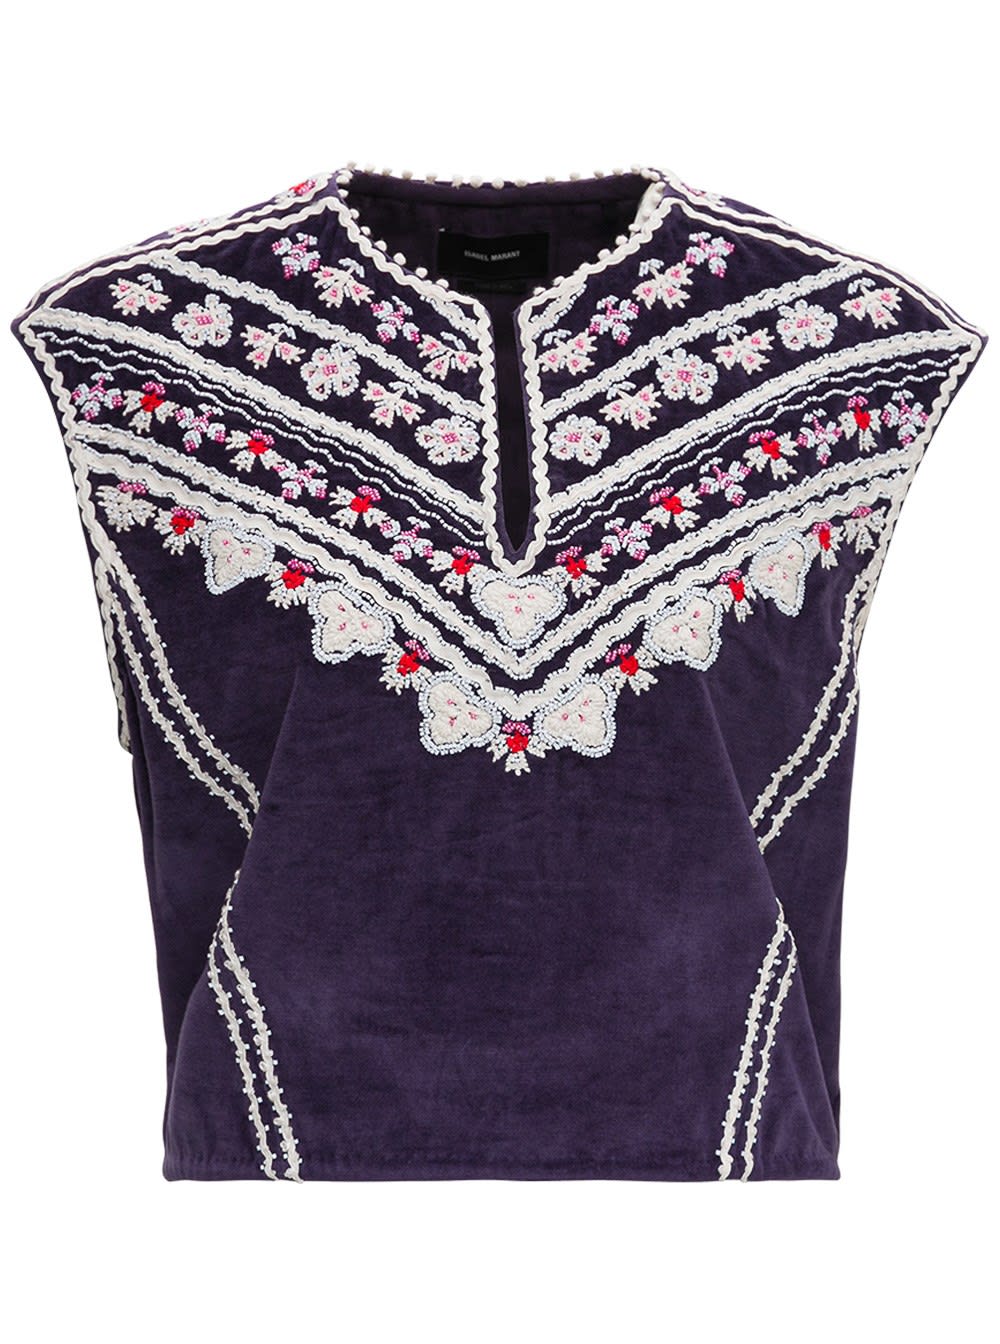 ISABEL MARANT CAMENA TOP IN EMBROIDERED VELVET,11789028